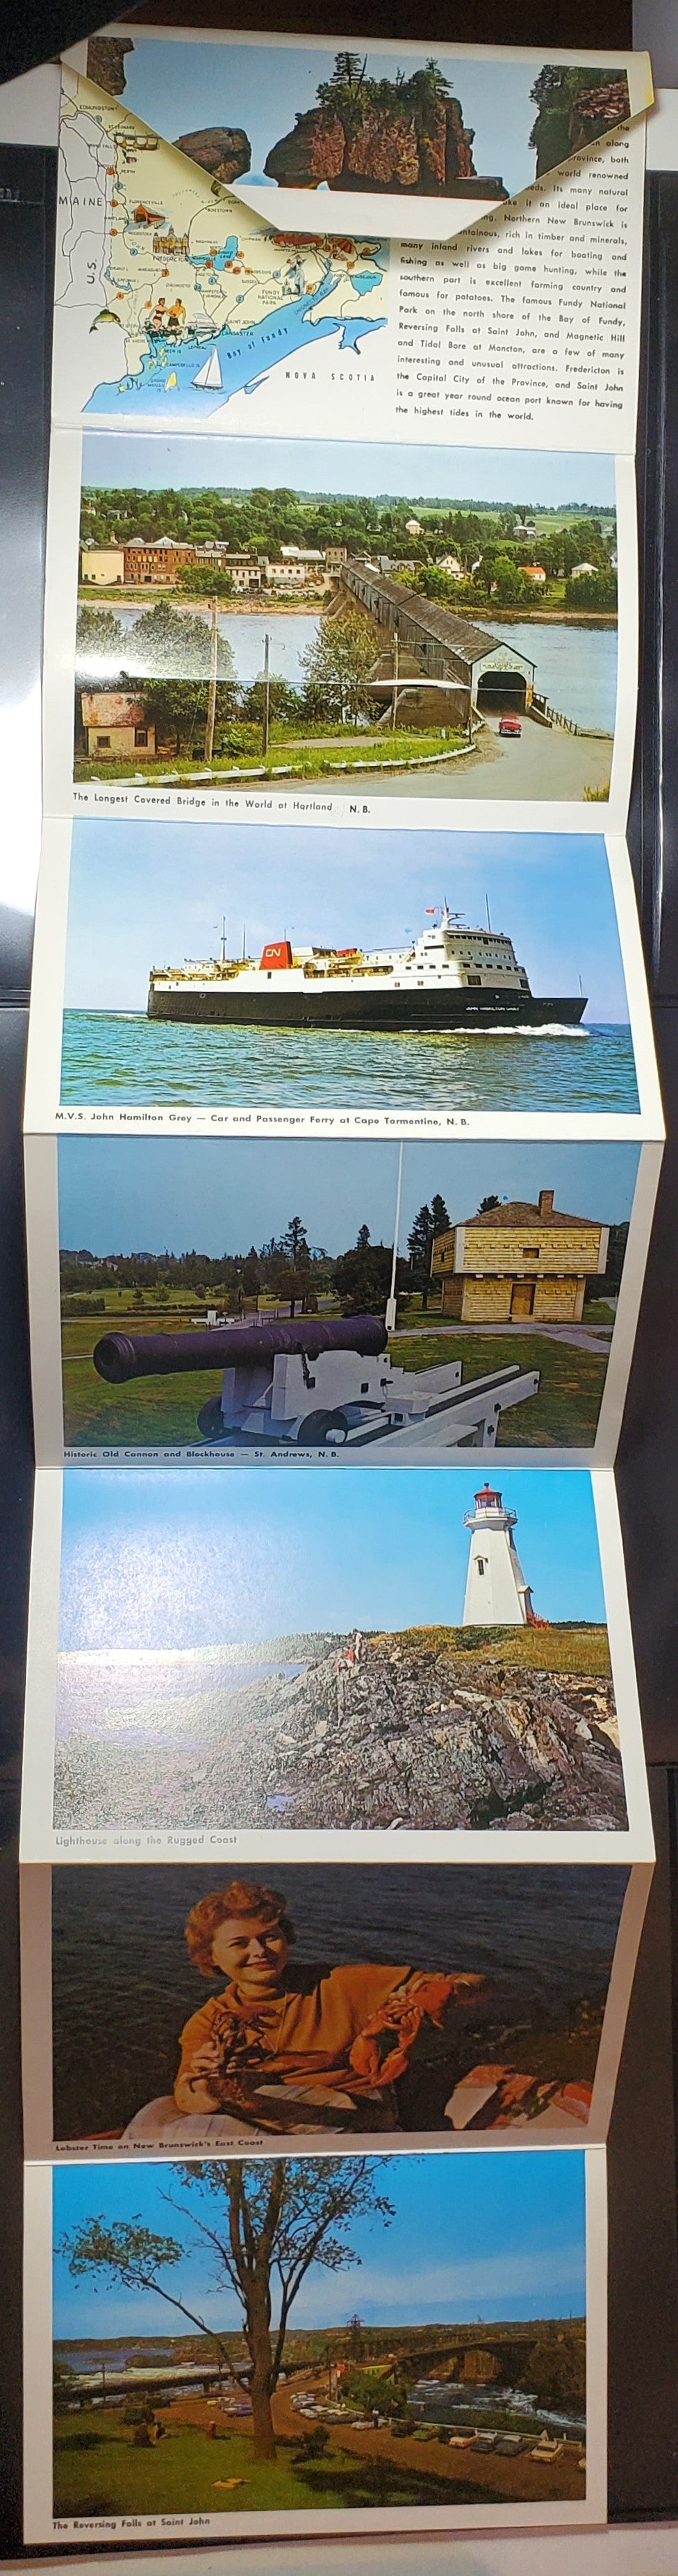 A Group of 2 Souvenir Postcard Folders From New Brunswick, Showing Various Tourist Attractions, From The 1960's, Overall VF, Net Est. $10